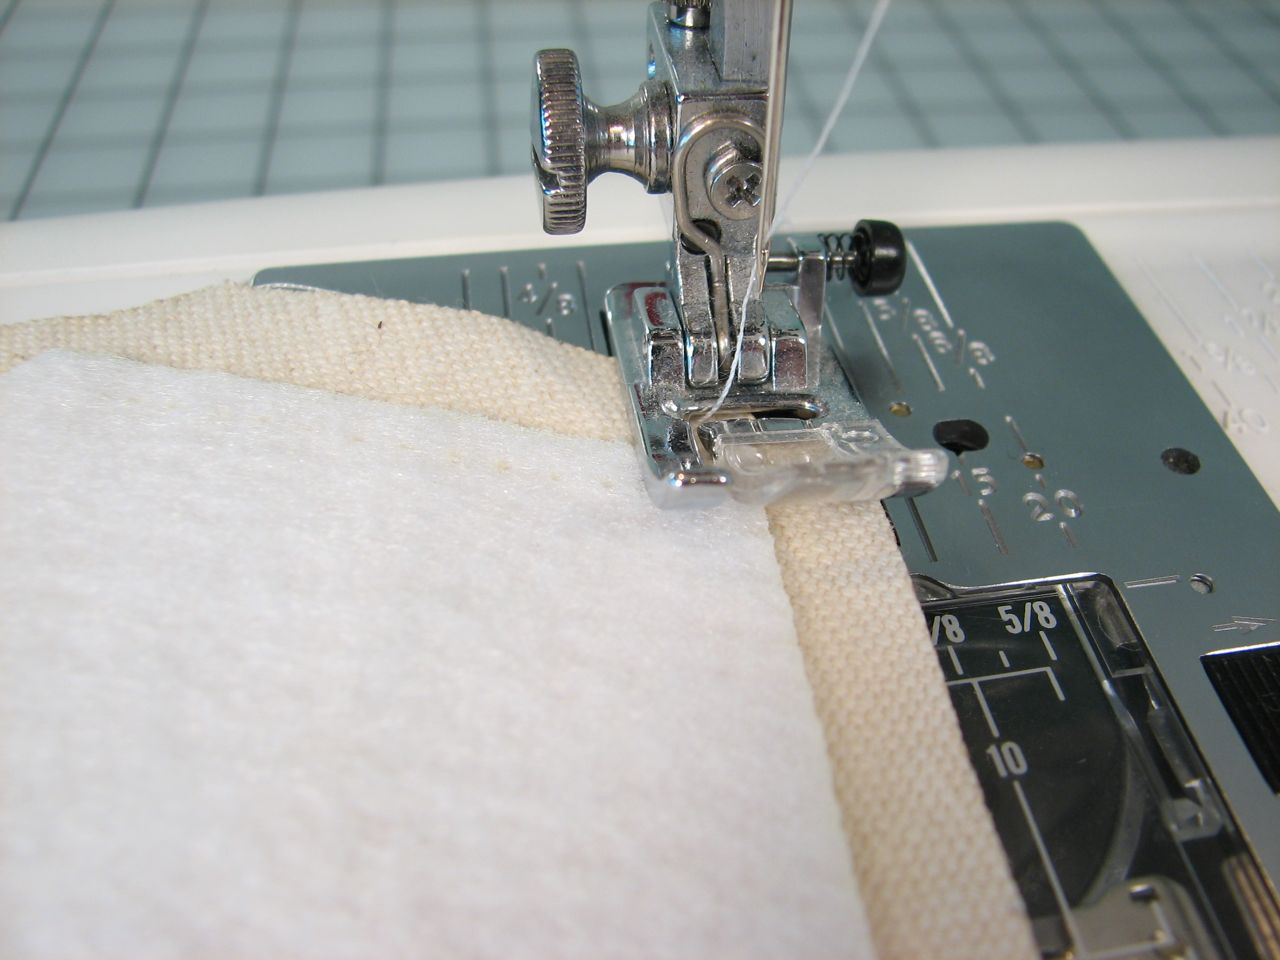 a close up of the sewing machine and needle on a cloth